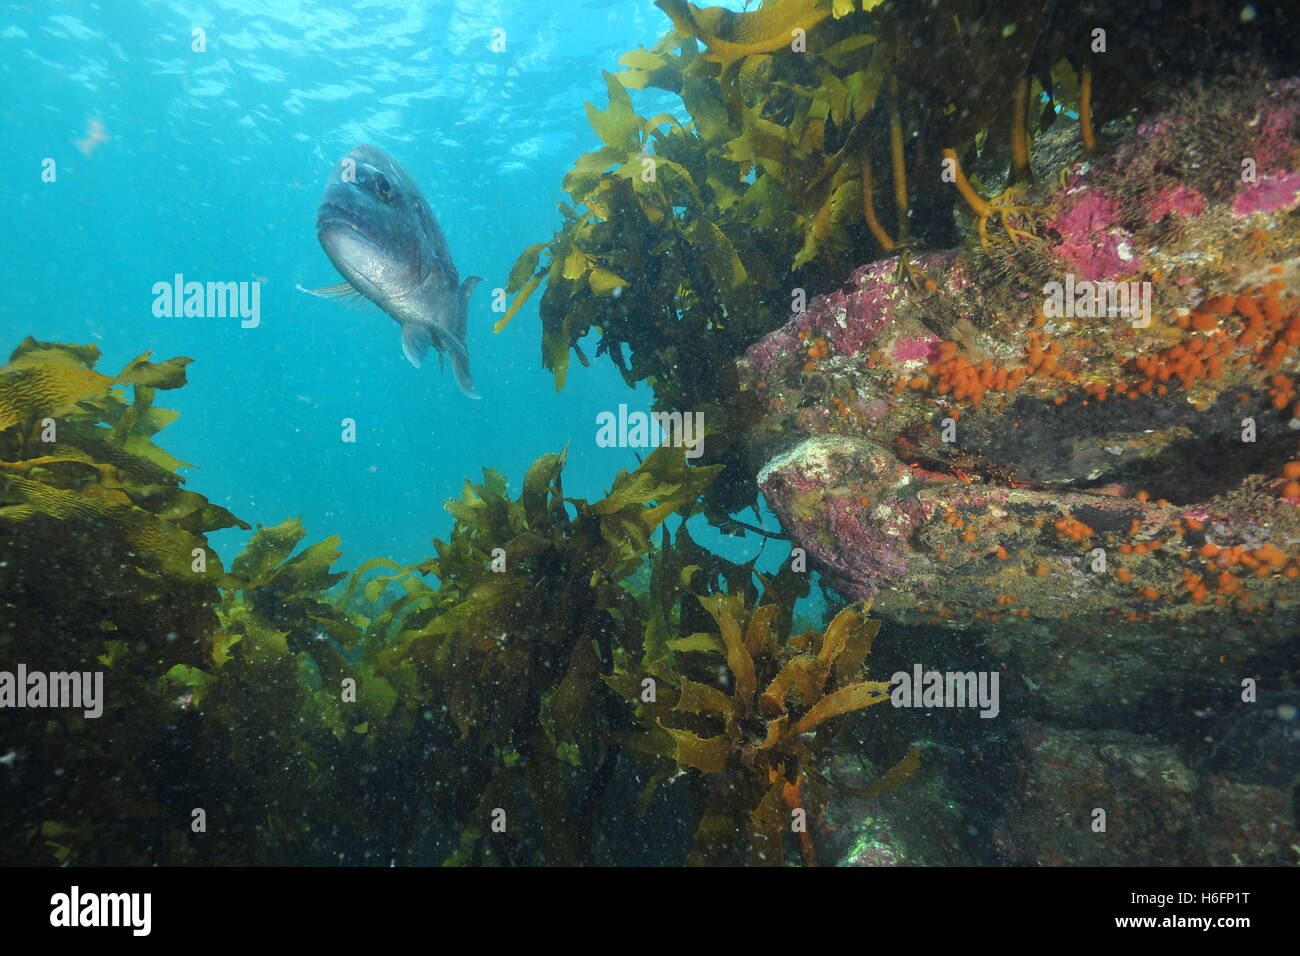 Australasian snapper above kelp covered rocky reef Stock Photo